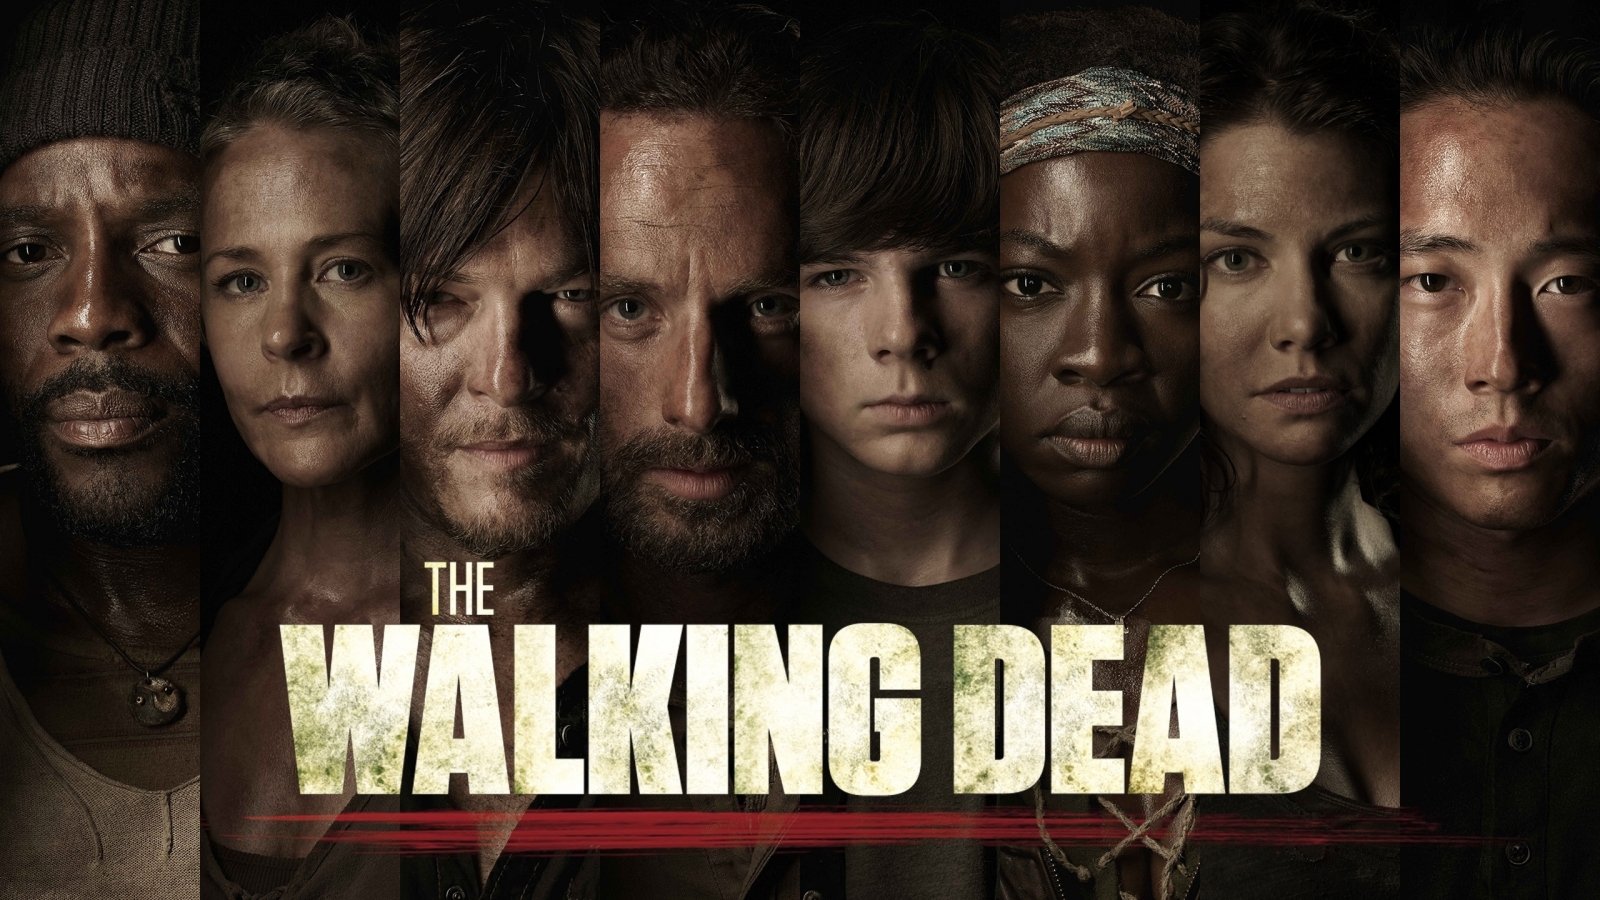 The Walking Dead Characters Poster for 1600 x 900 HDTV resolution